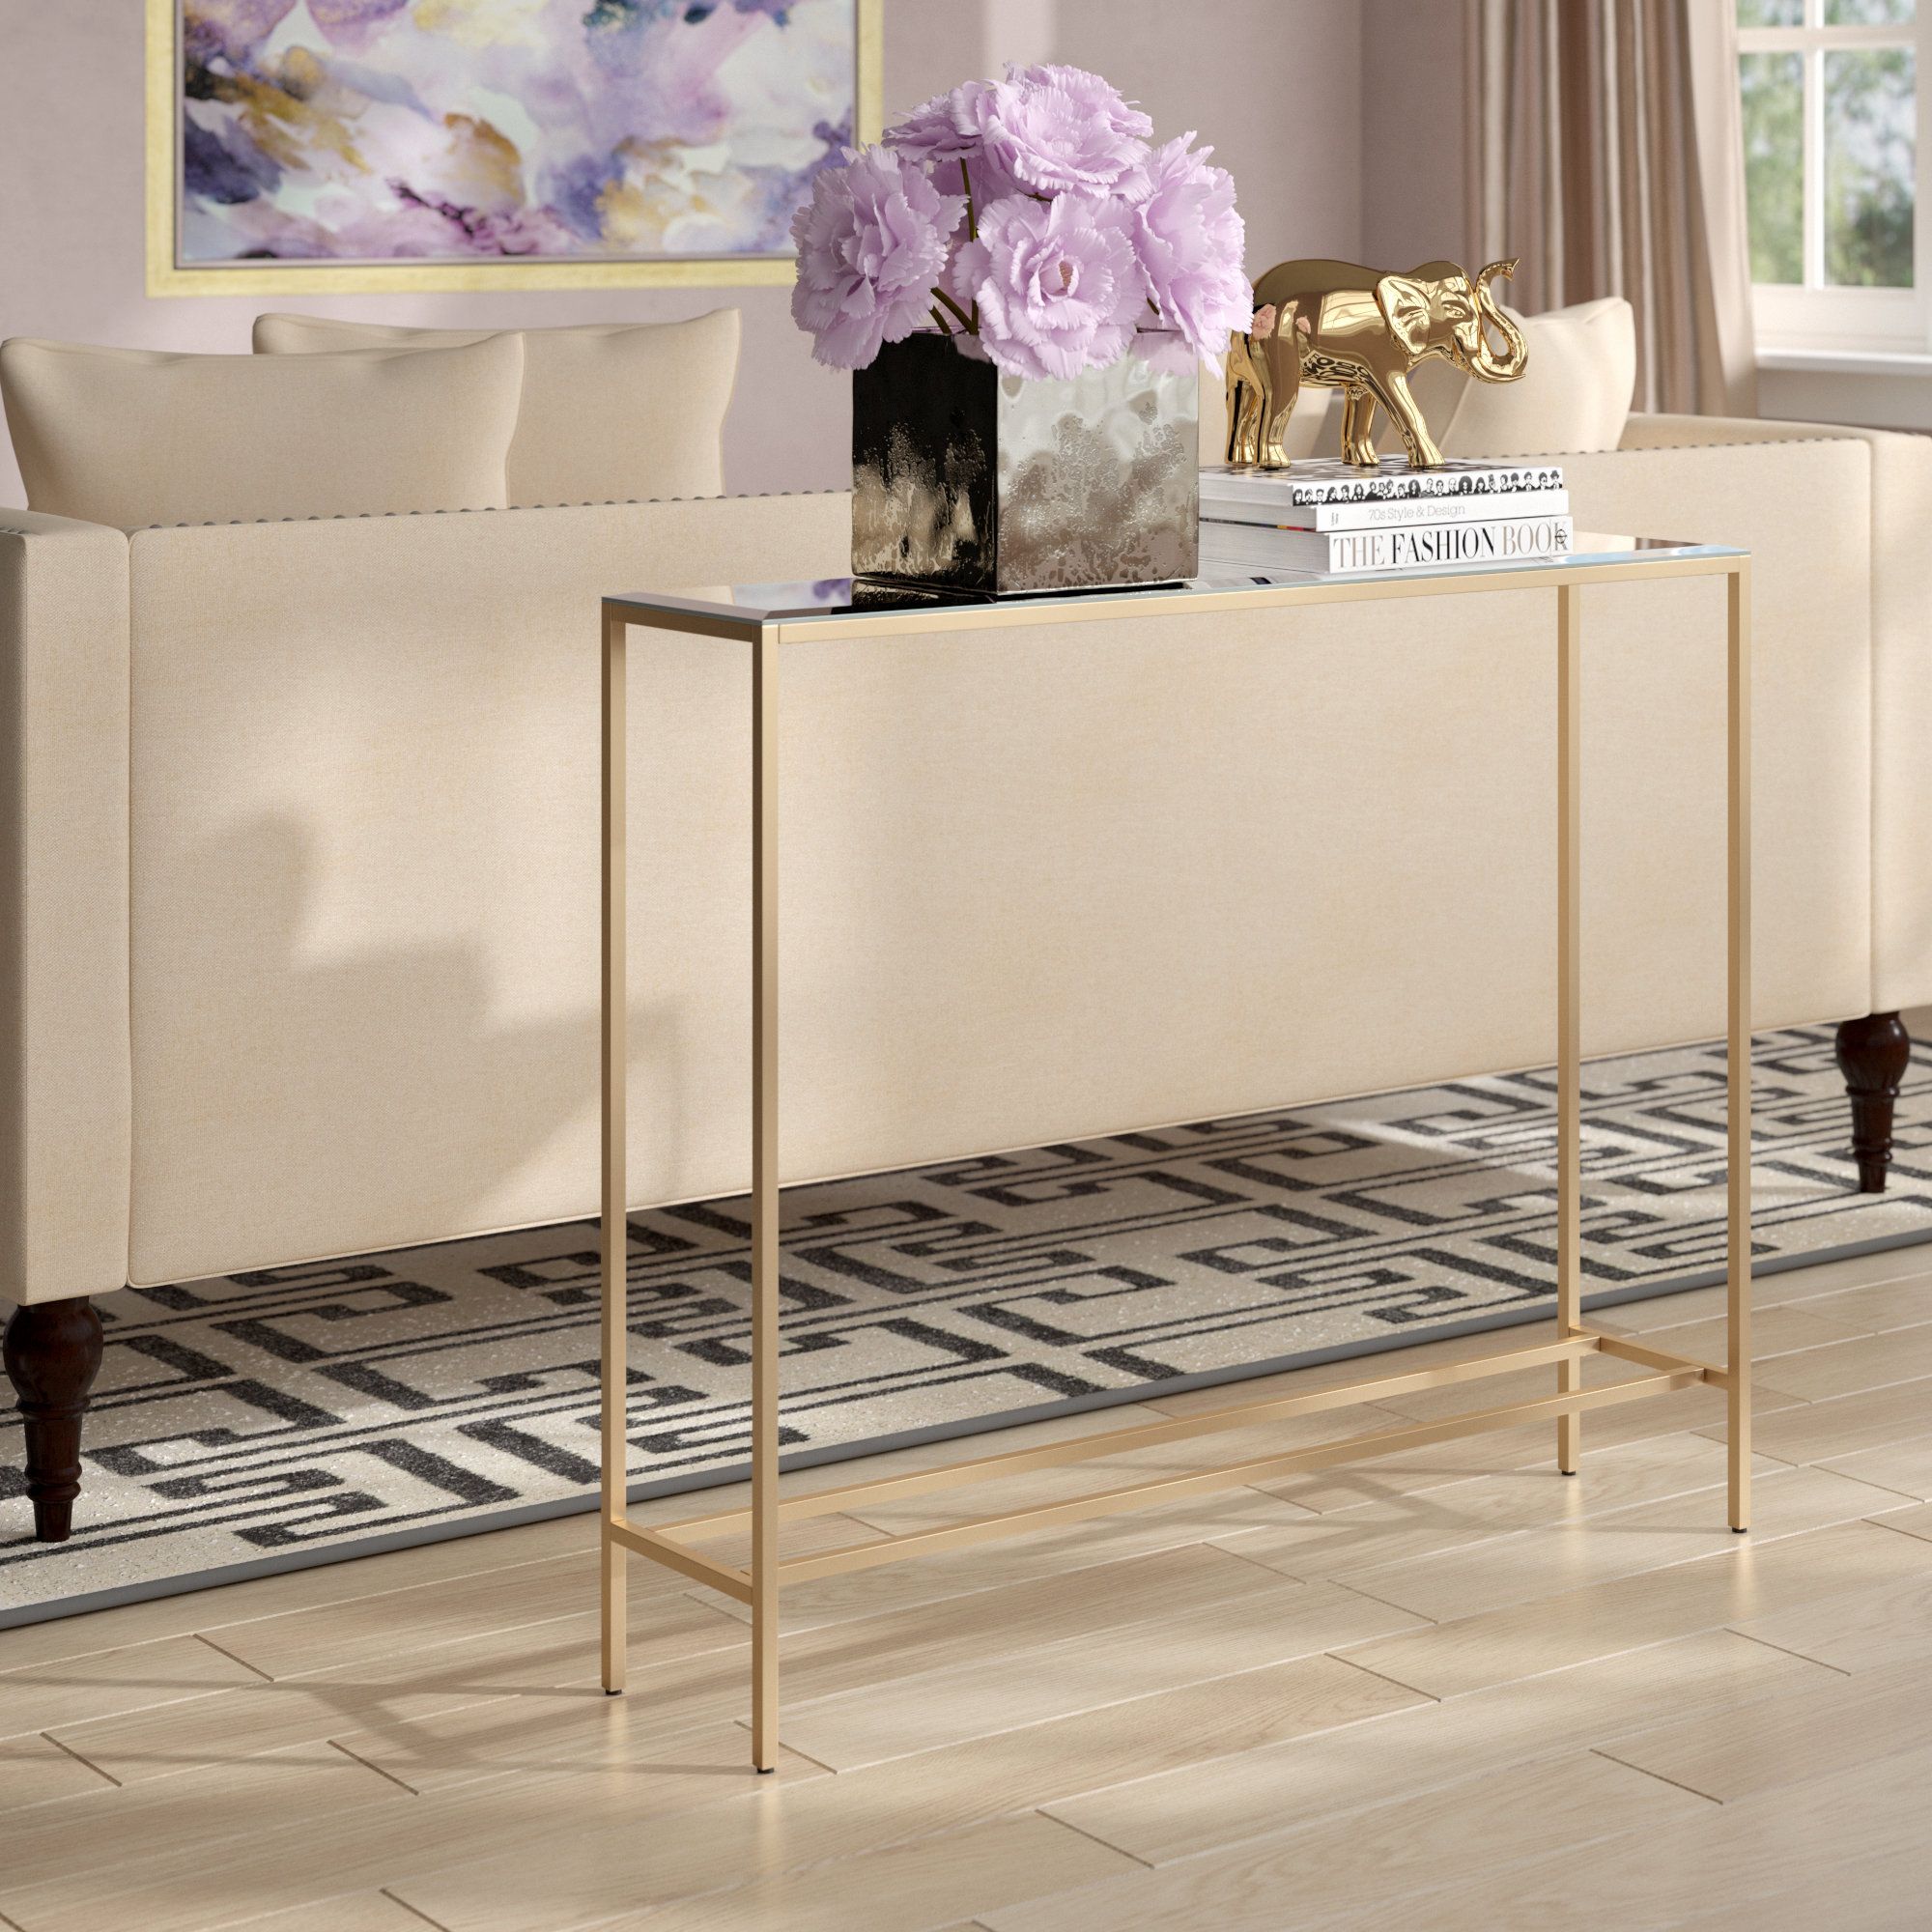 Narrow Console Tables You'll Love | Wayfair Within Natural Cane Media Console Tables (View 15 of 30)